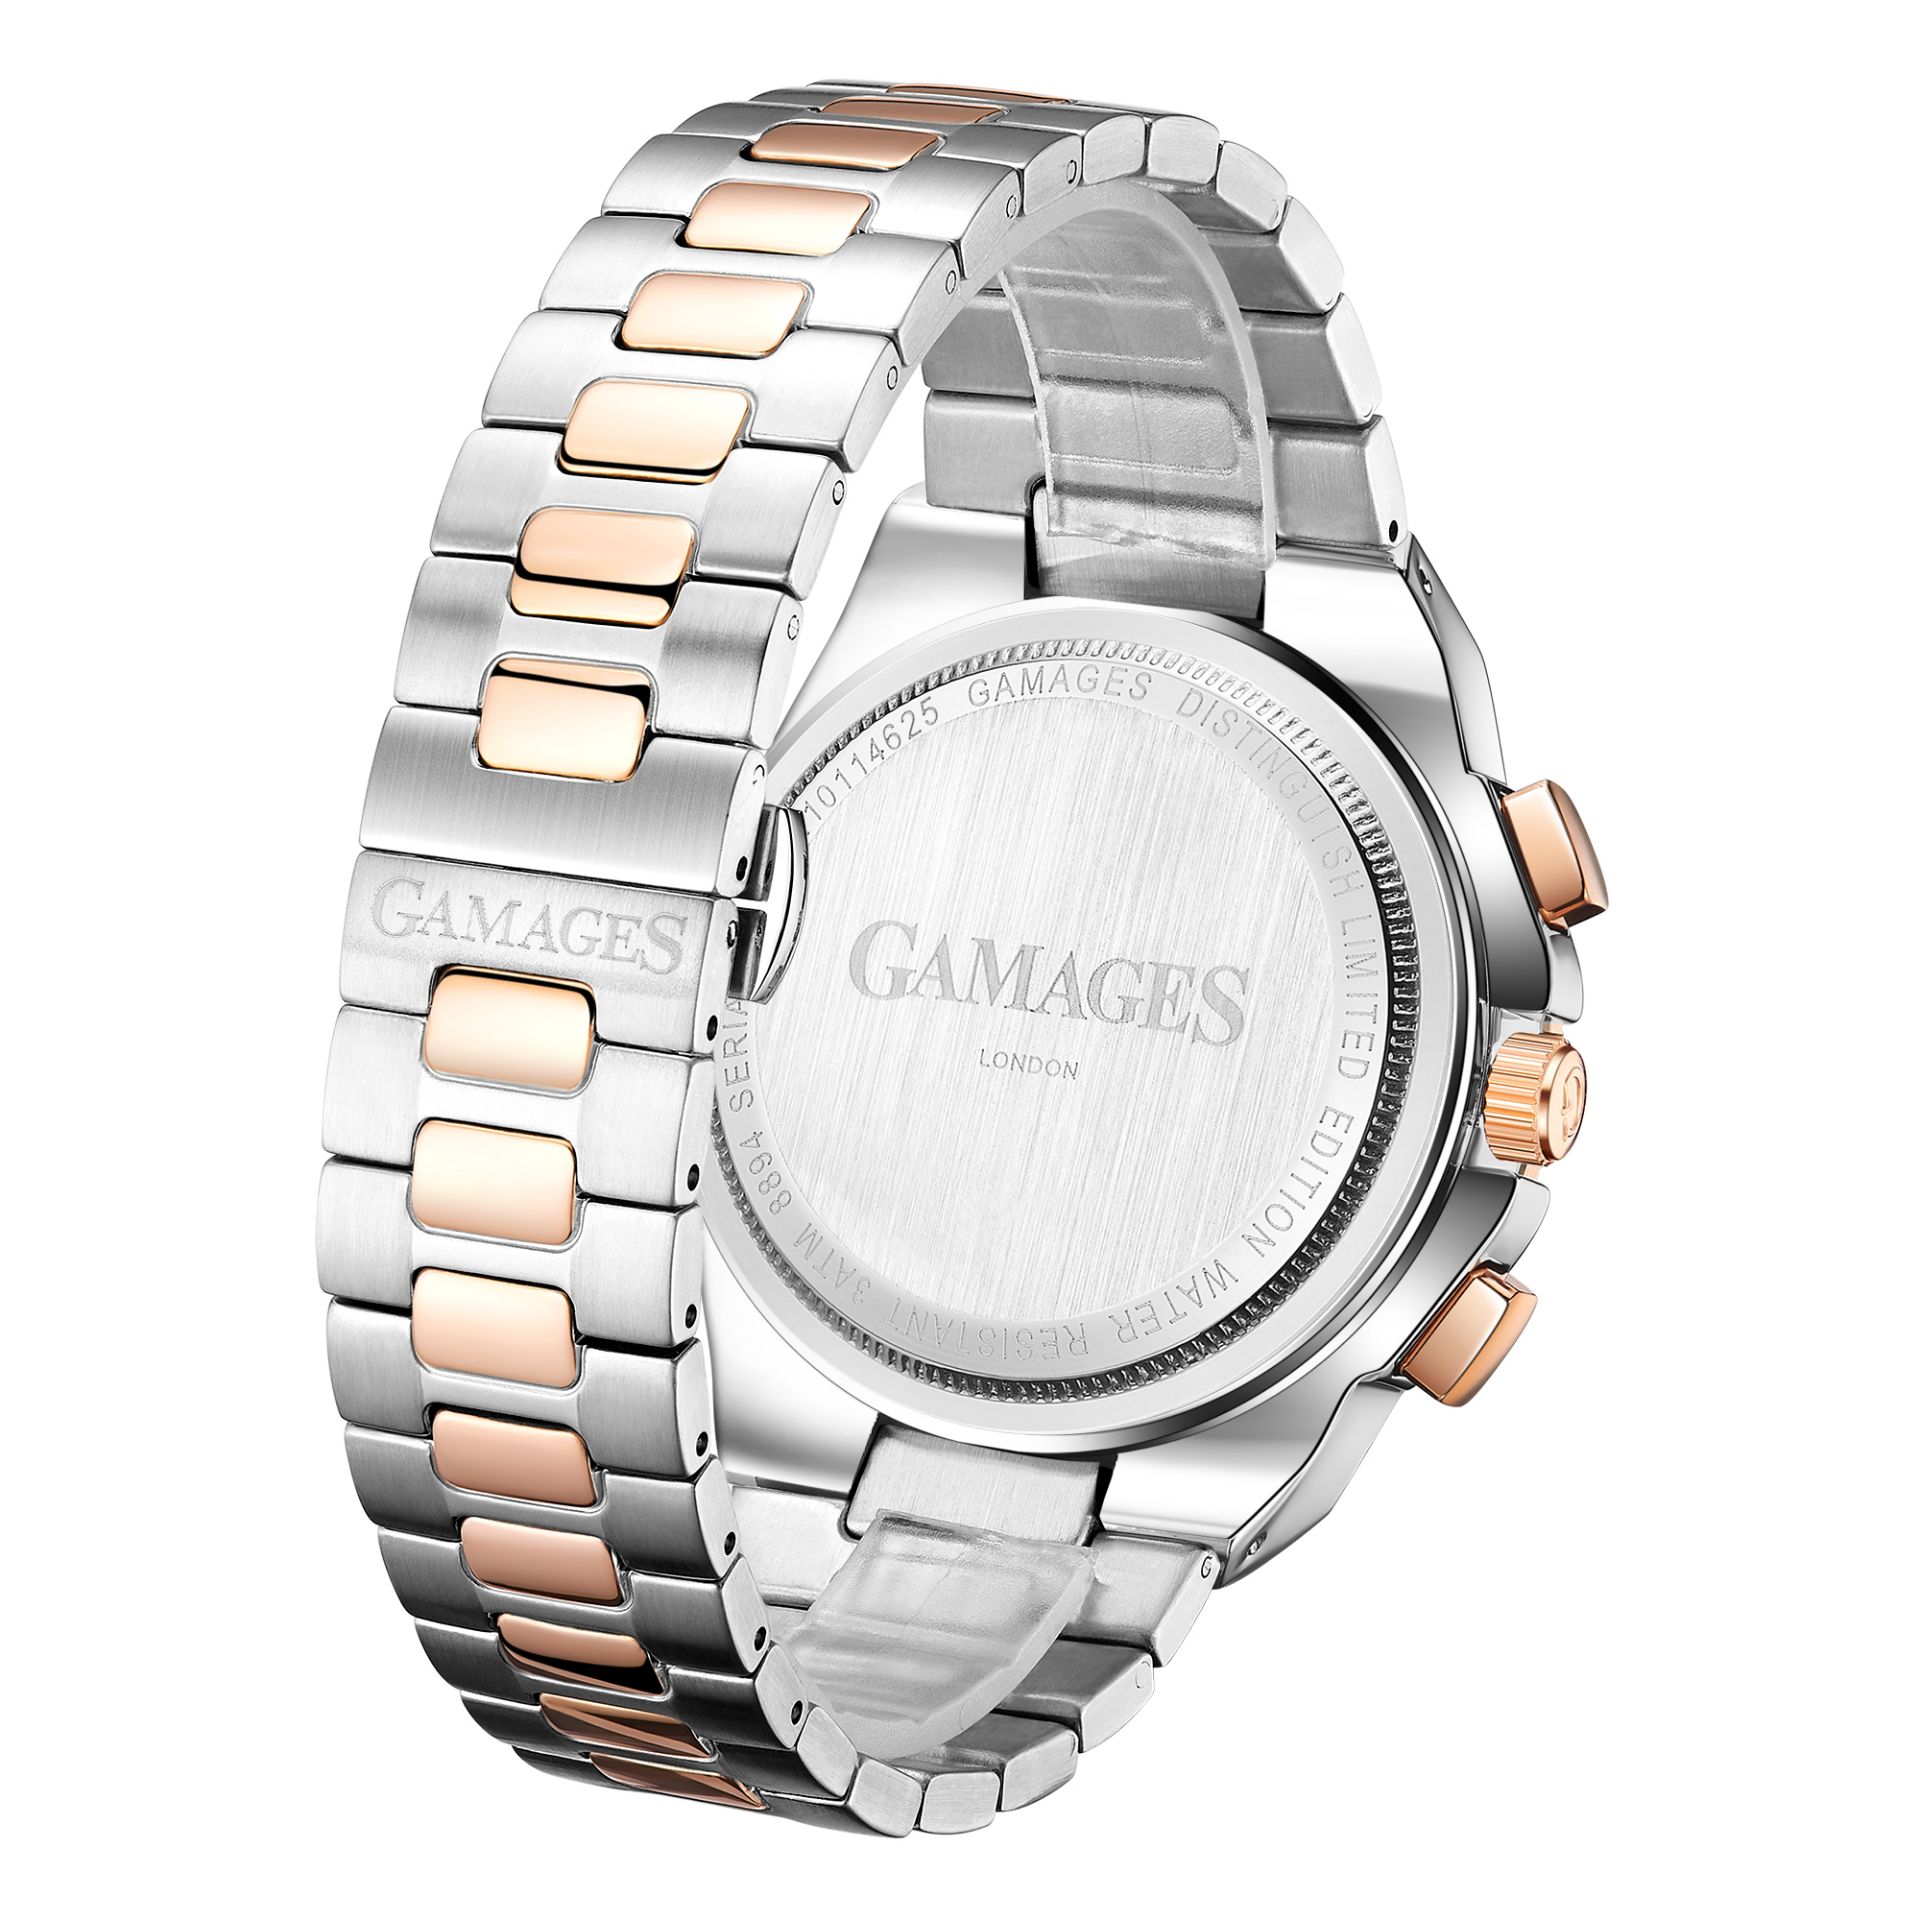 Ltd Ed Hand Assembled Gamages Distinguish Automatic Two Tone – 5 Year Warranty & Free Delivery - Image 4 of 5